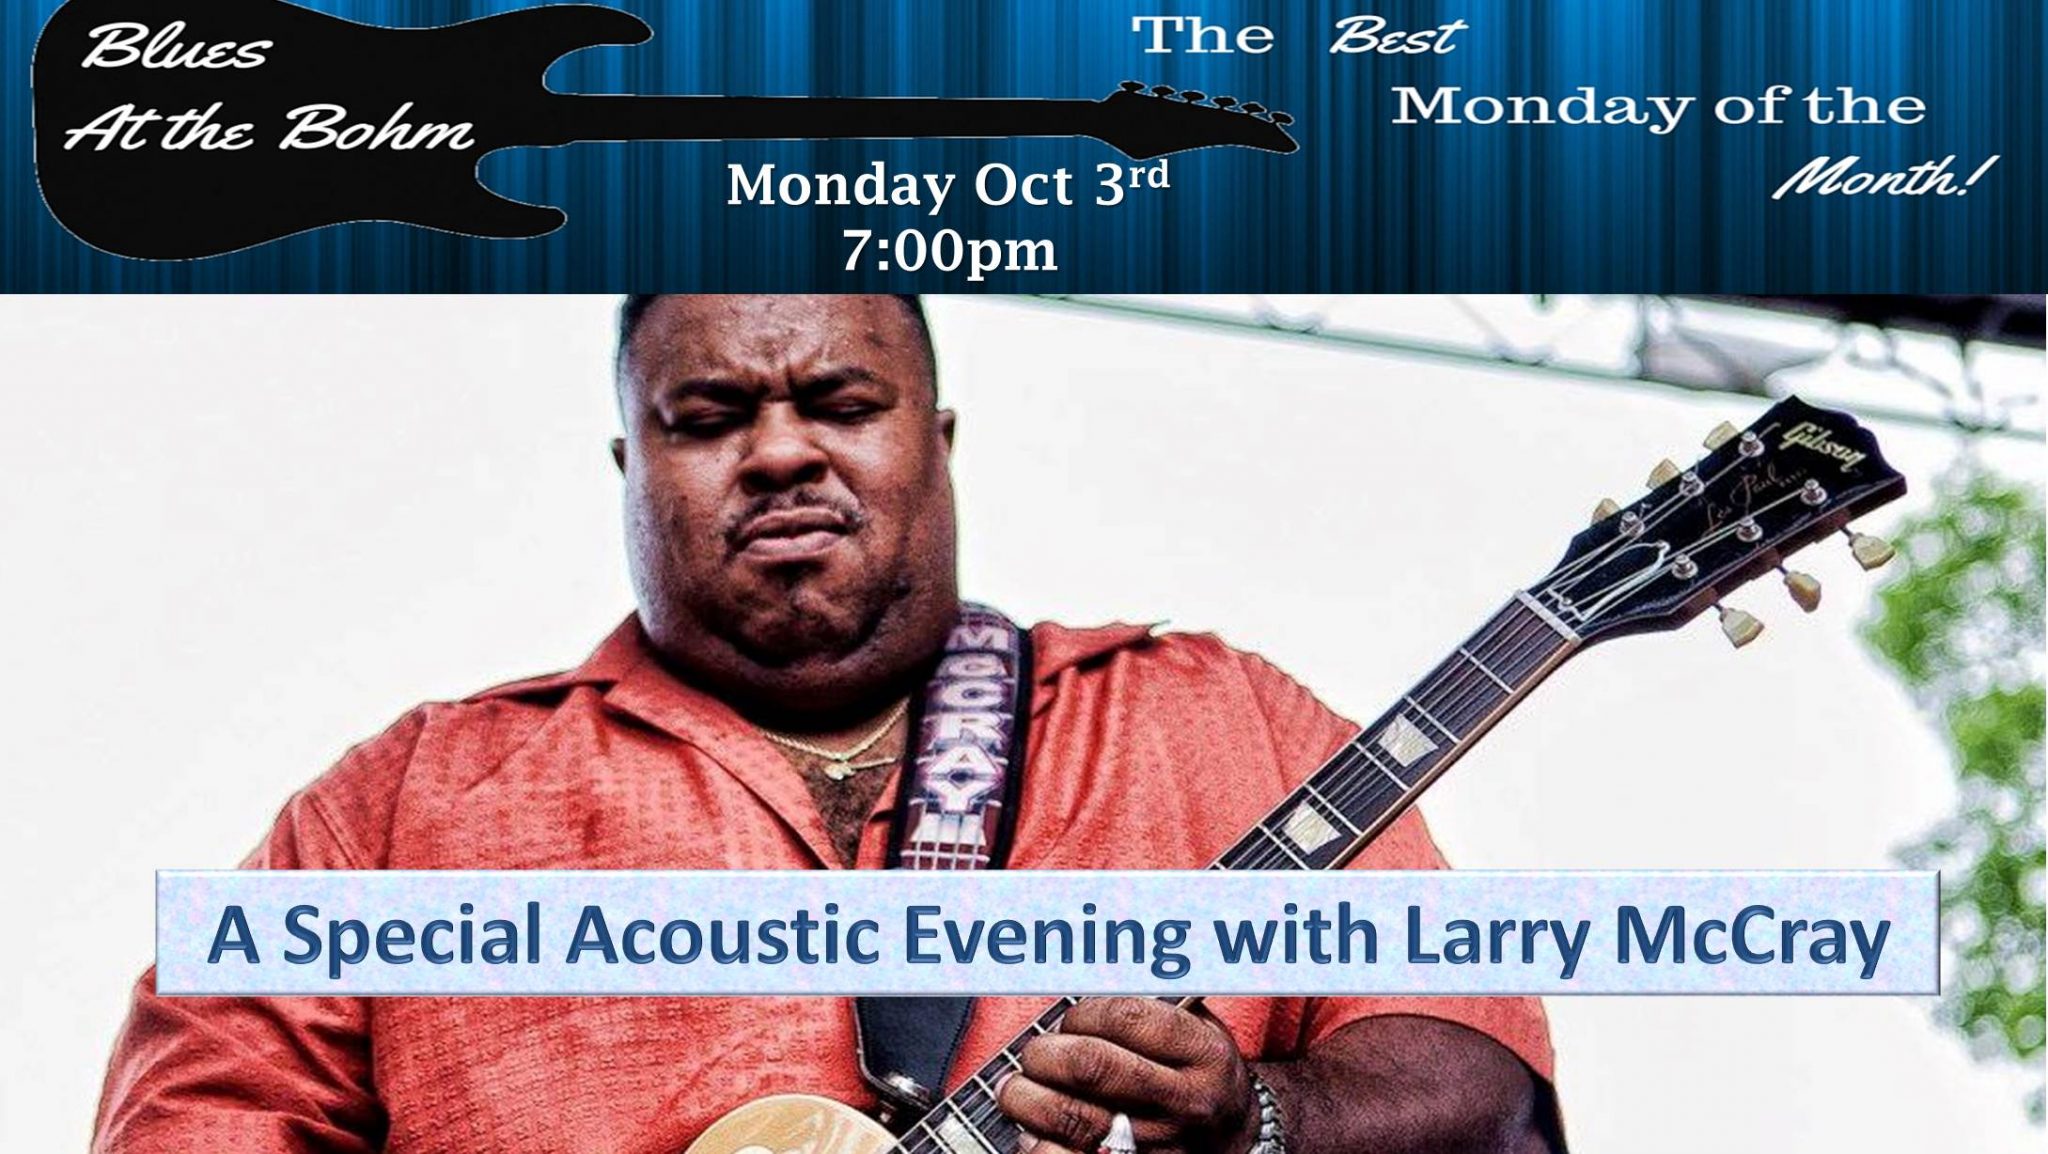 Blues At The Bohm — A Special Acoustic Evening With Larry Mccray Solo